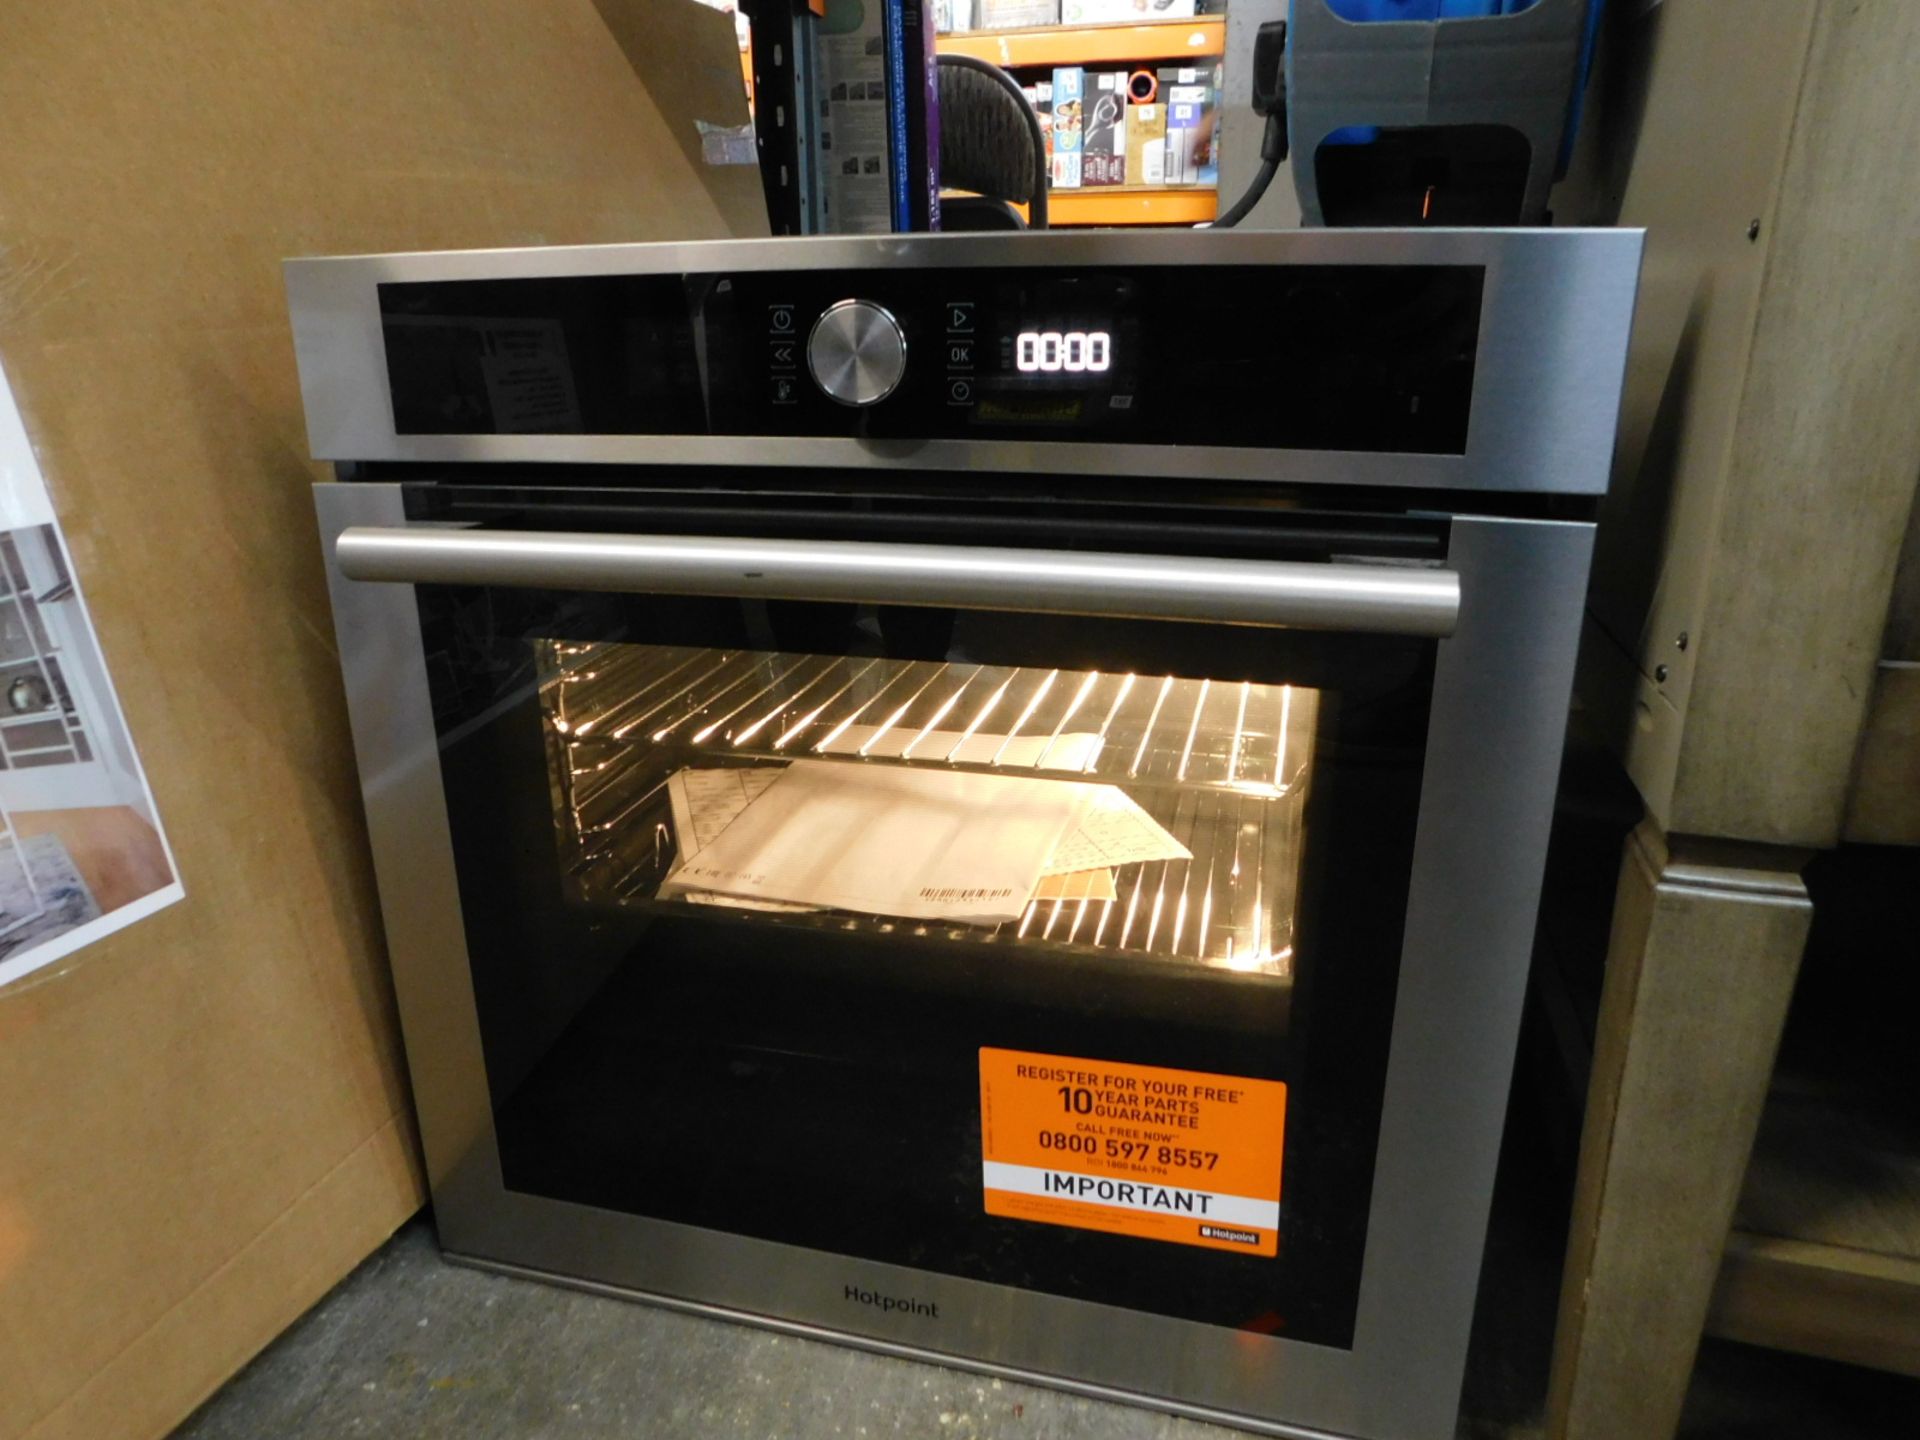 1 HOTPOINT CLASS 4 SI4 854 H IX STAINLESS STEEL ELECTRIC OVEN RRP £279.99